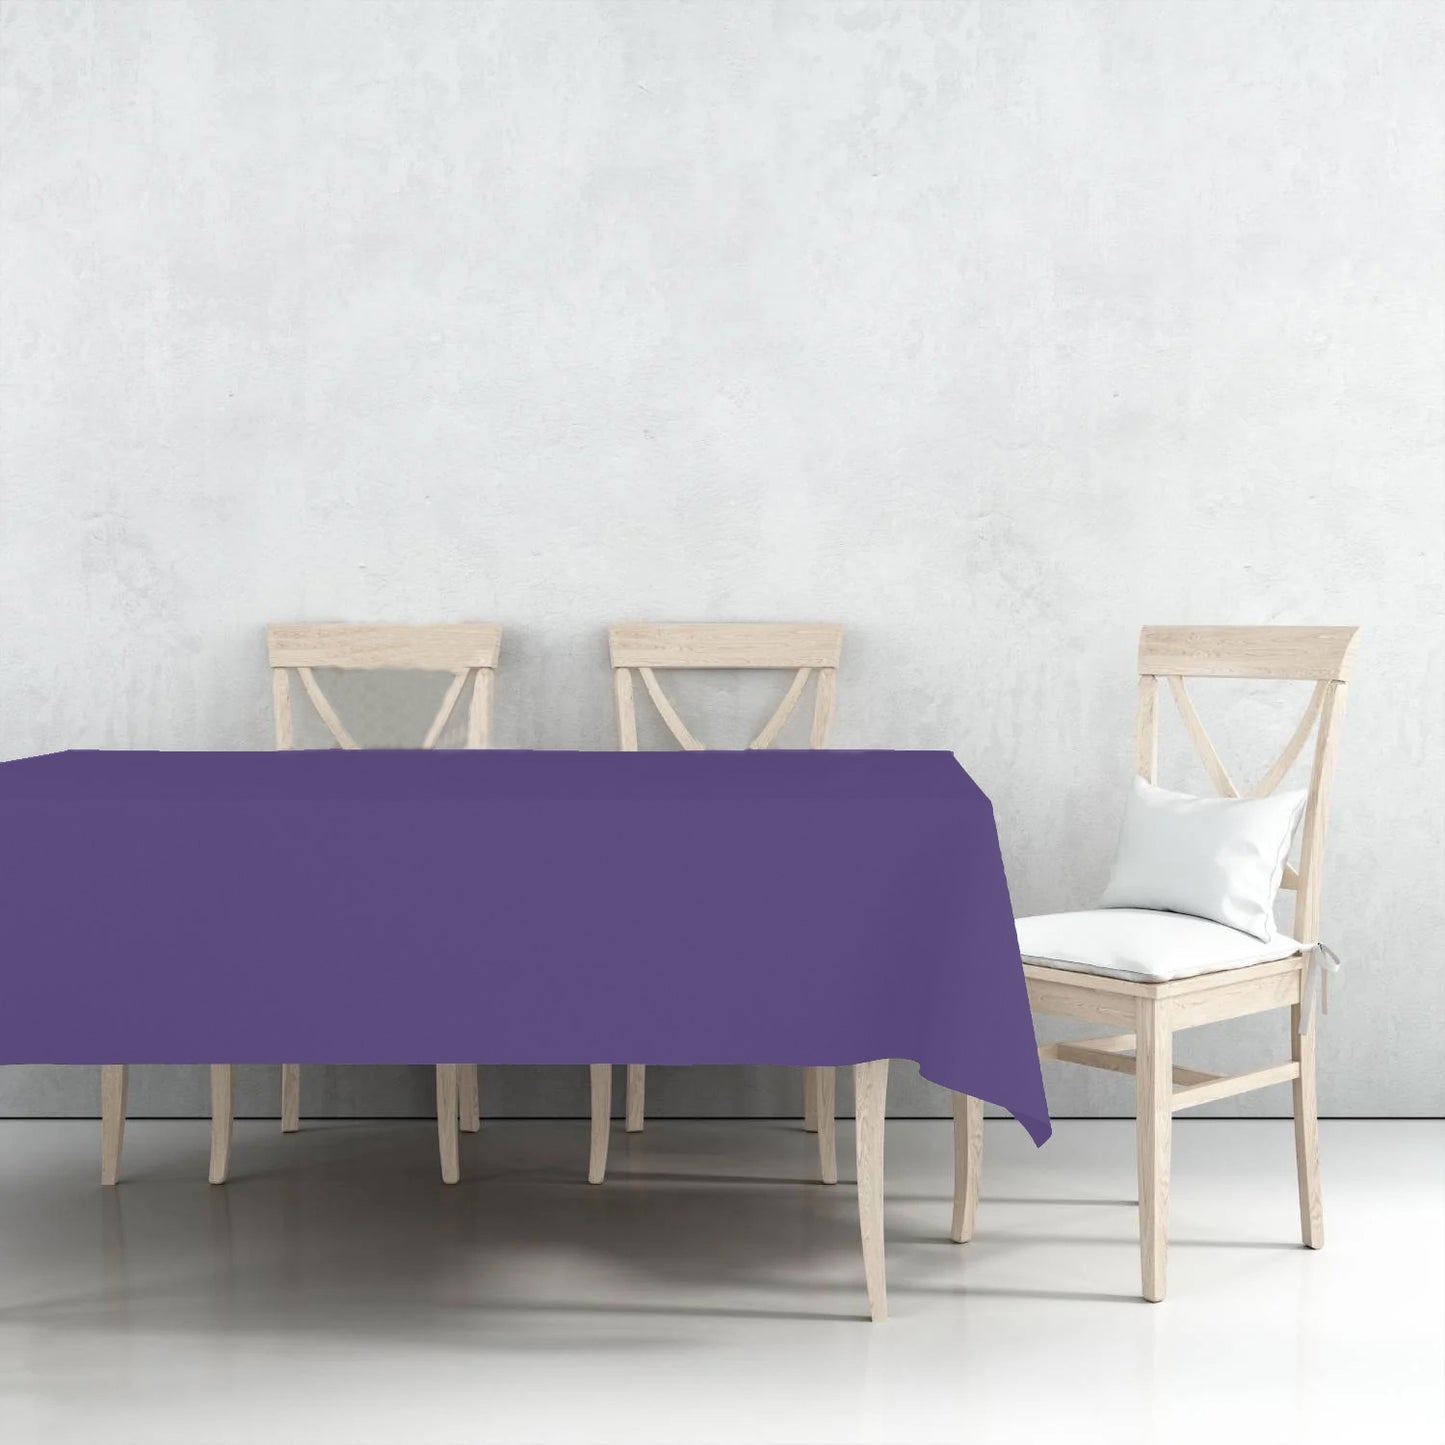 Disposable Plastic Premium Tablecloth Heavyweight Rectangle Purple 54" x 108" Tablesettings Nicole Fantini Collection   